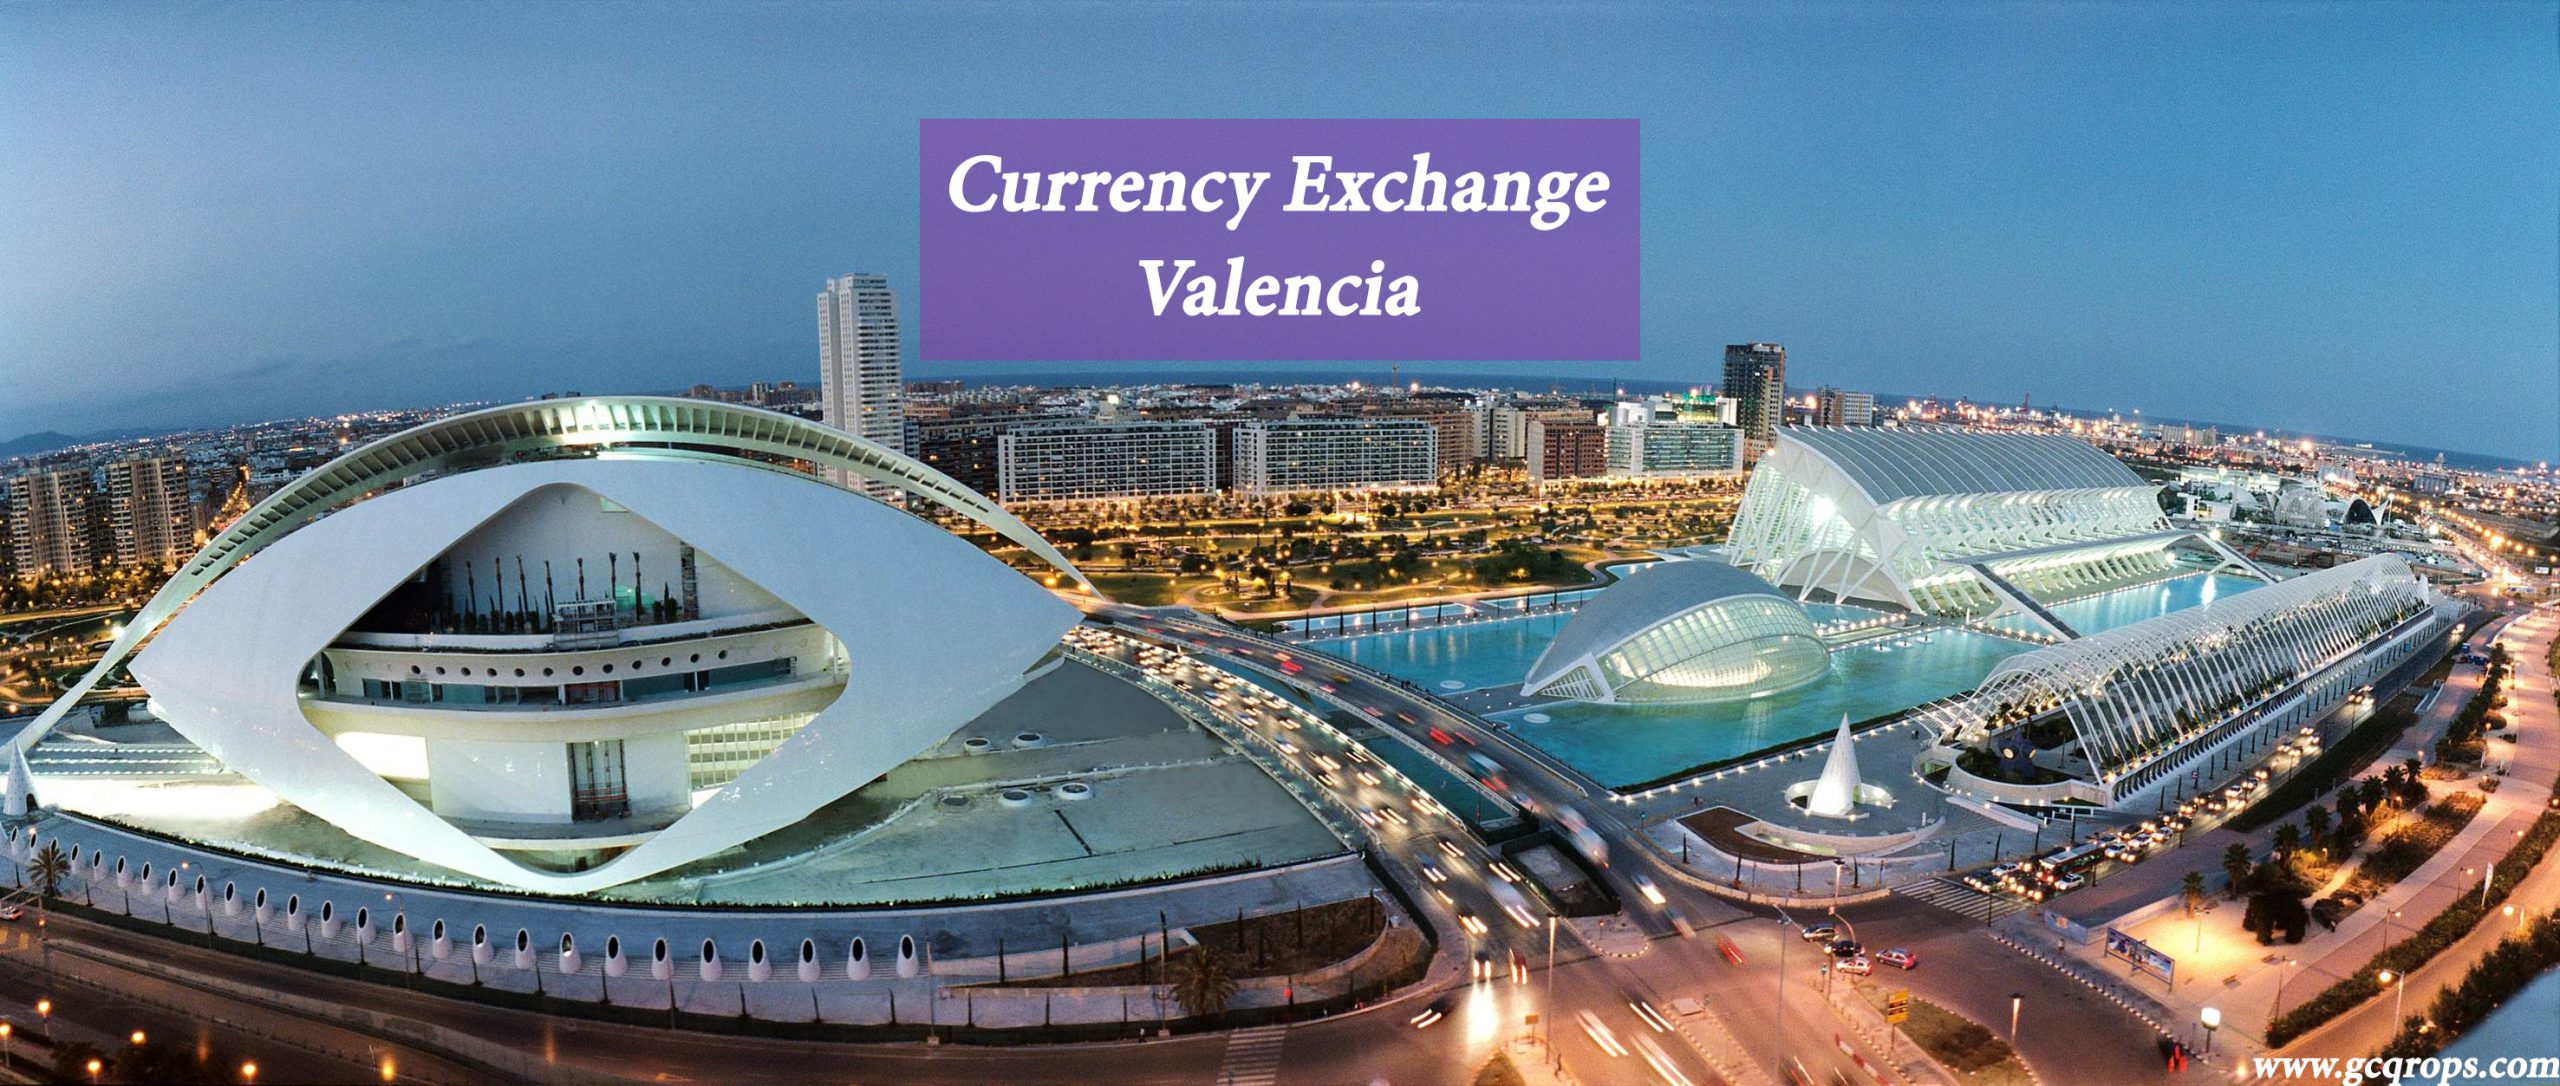 Currency Exchange Valencia